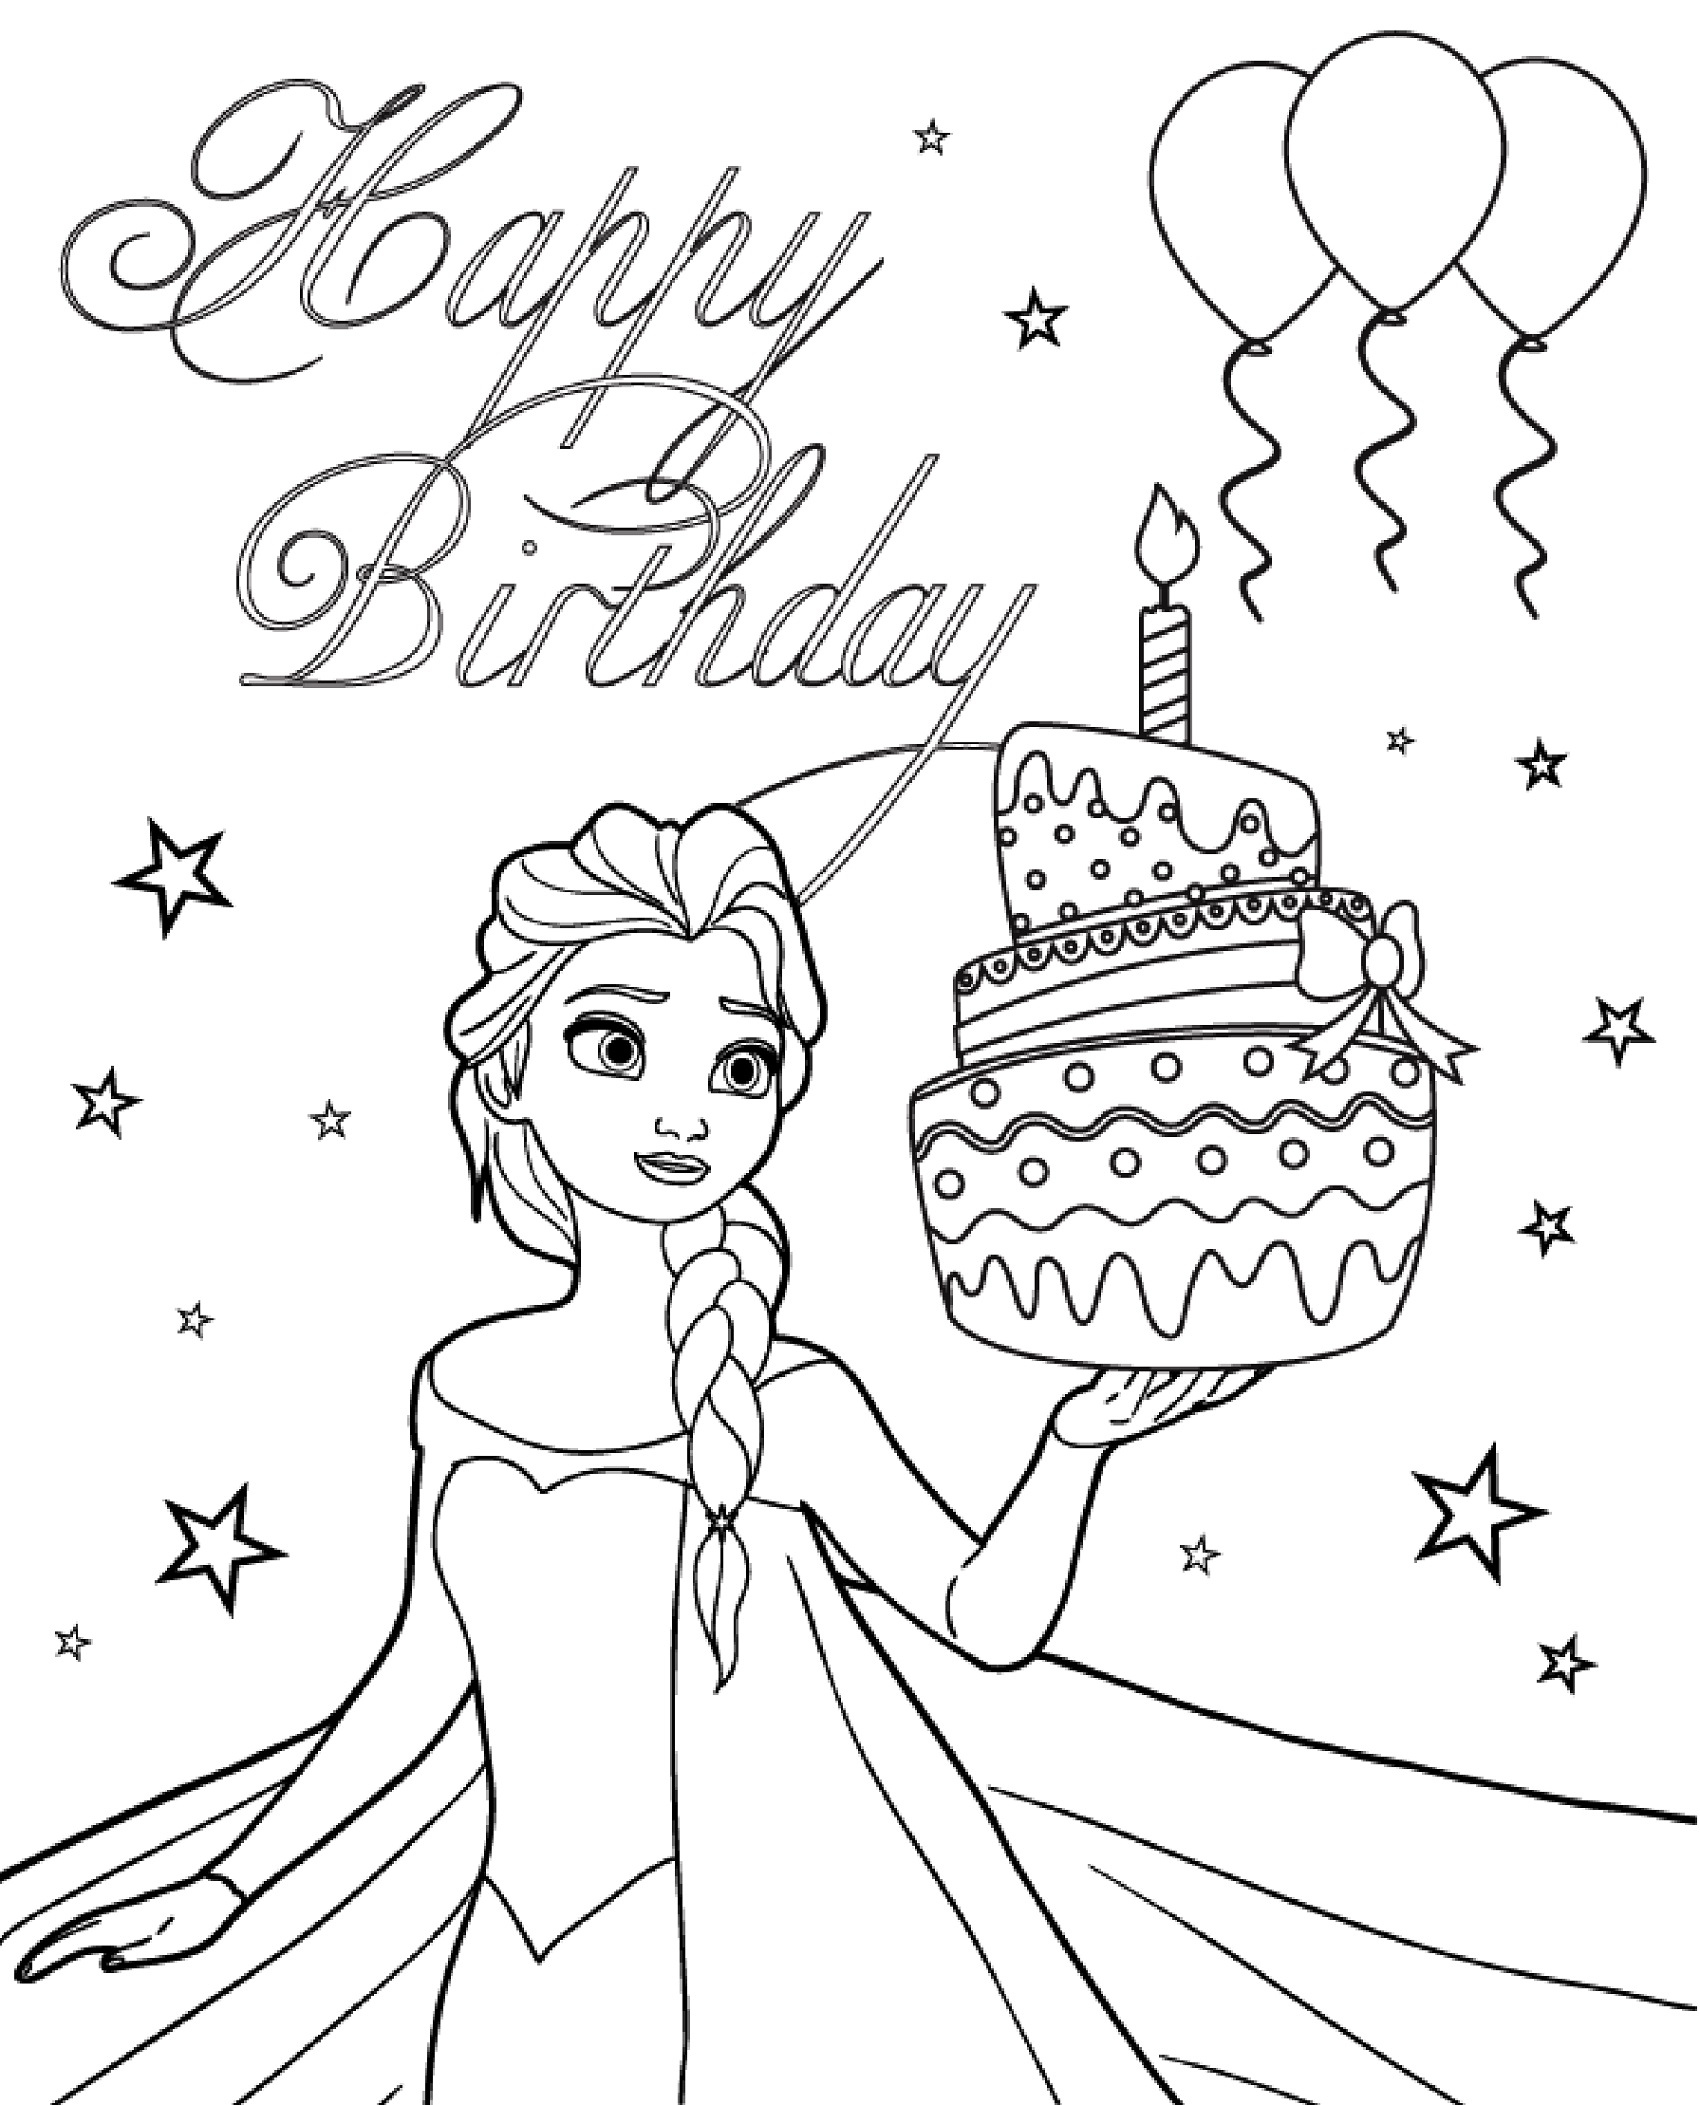 printable-birthday-card-coloring-pages-101-activity-free-printable